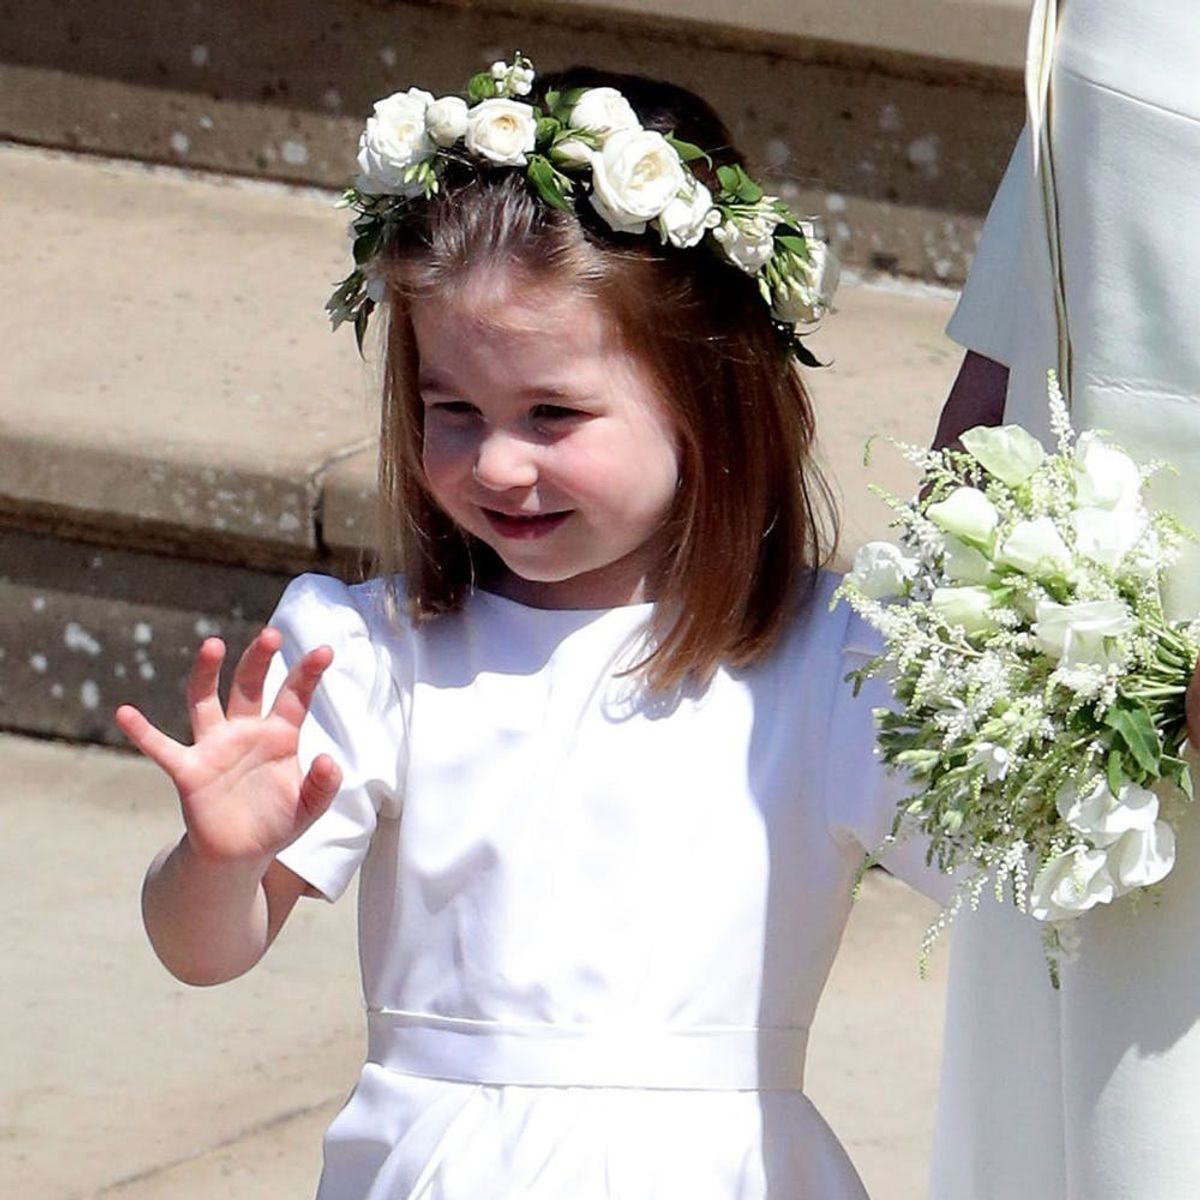 See Prince George, Princess Charlotte, and the Rest of the Adorable Royal Wedding Party